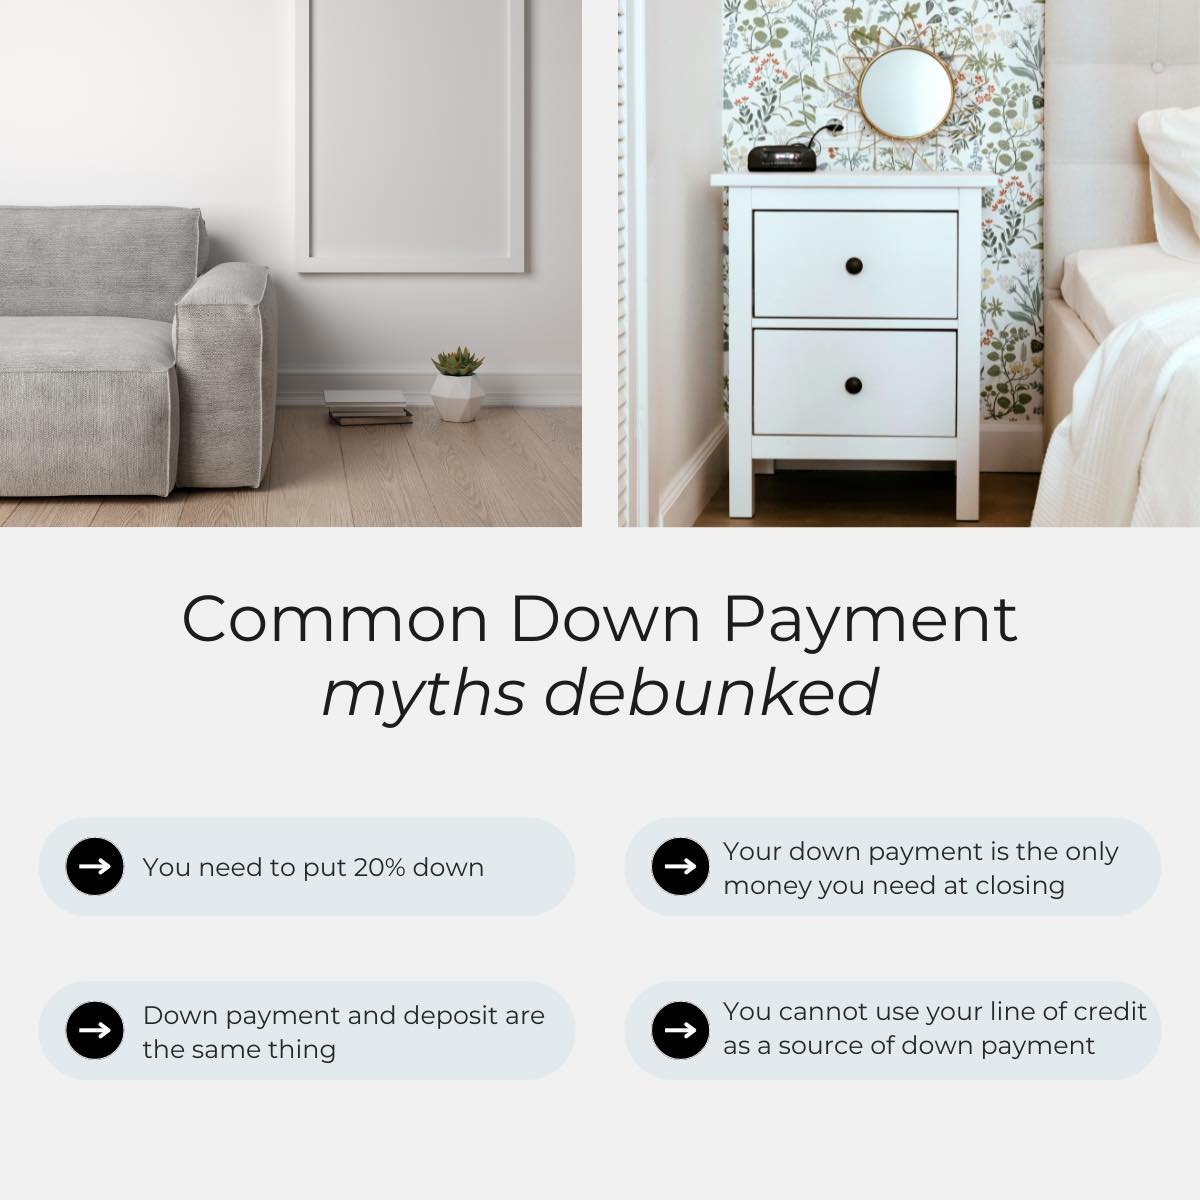 🏡 Debunking Mortgage Myths! 🌟

Myth #1: &quot;You need 20% down.&quot; Reality: Nope! While a 20% down payment can dodge mortgage insurance, many programs offer options with lower down payments, making homeownership more accessible than you might t